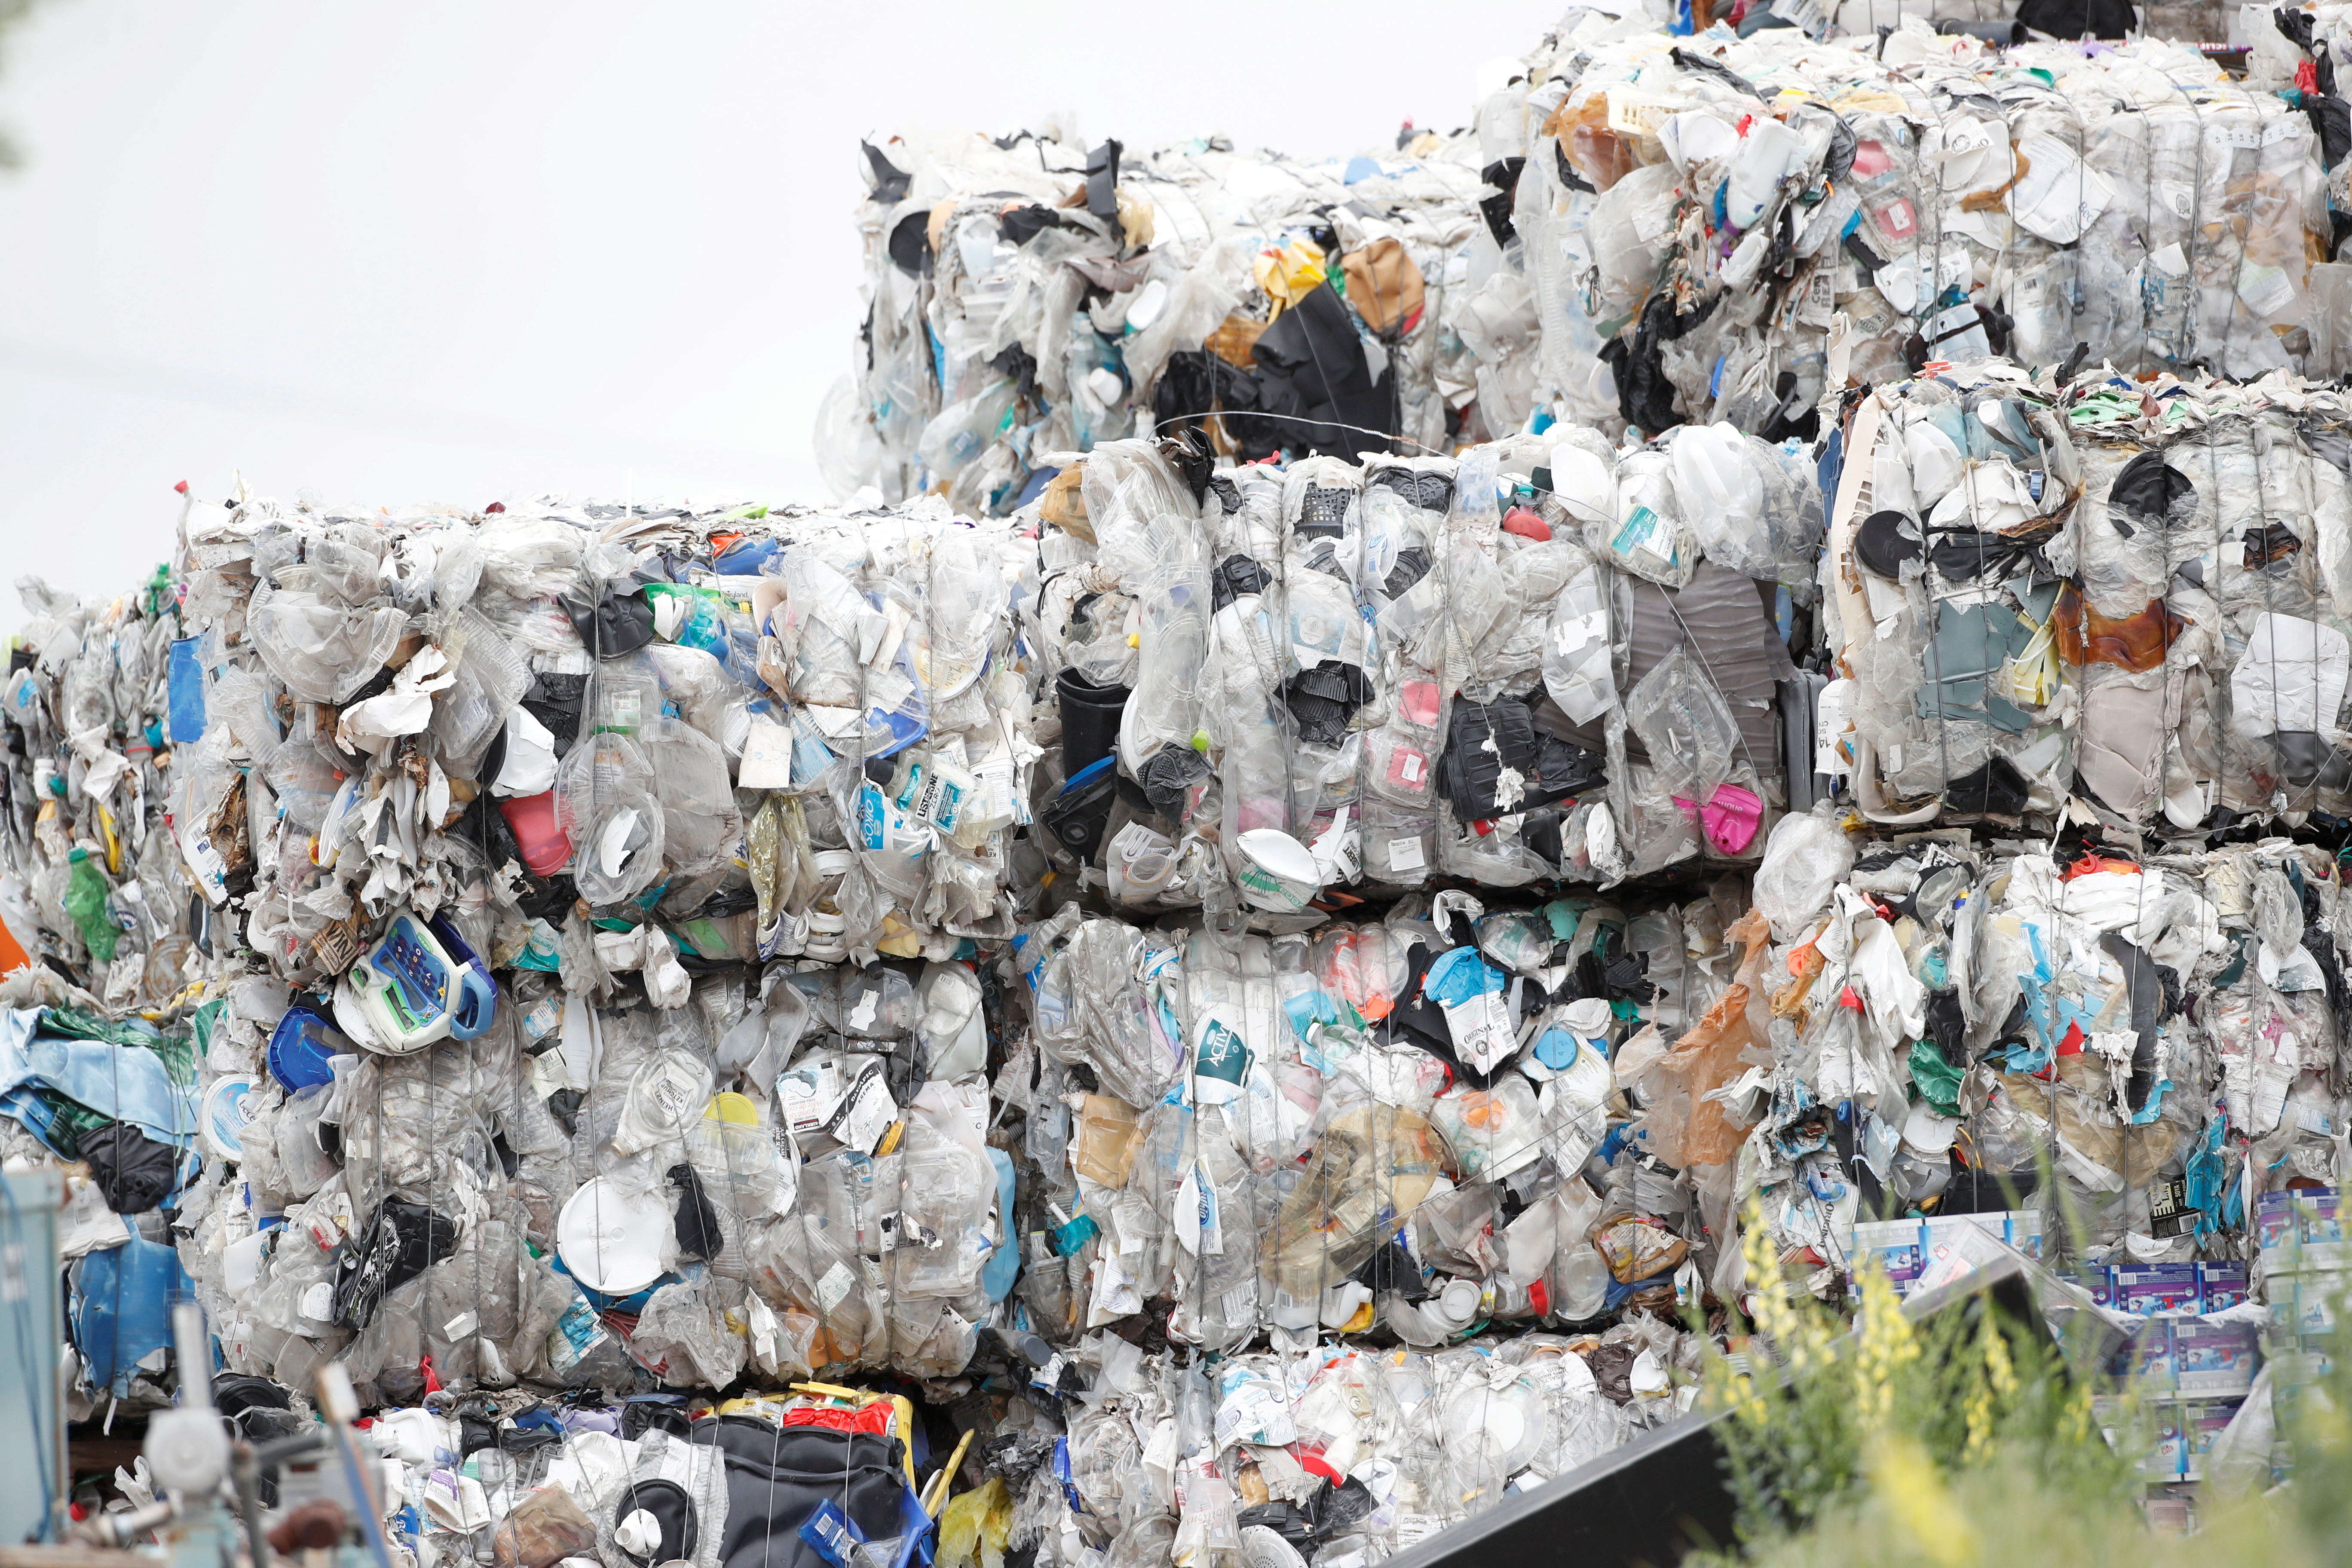 FILE PHOTO: Bales of hard-to-recycle plastic waste are seen piled up at Renewlogy Technologies in Salt Lake City, Utah, U.S., on May 17, 2021. REUTERS/George Frey/File Photo